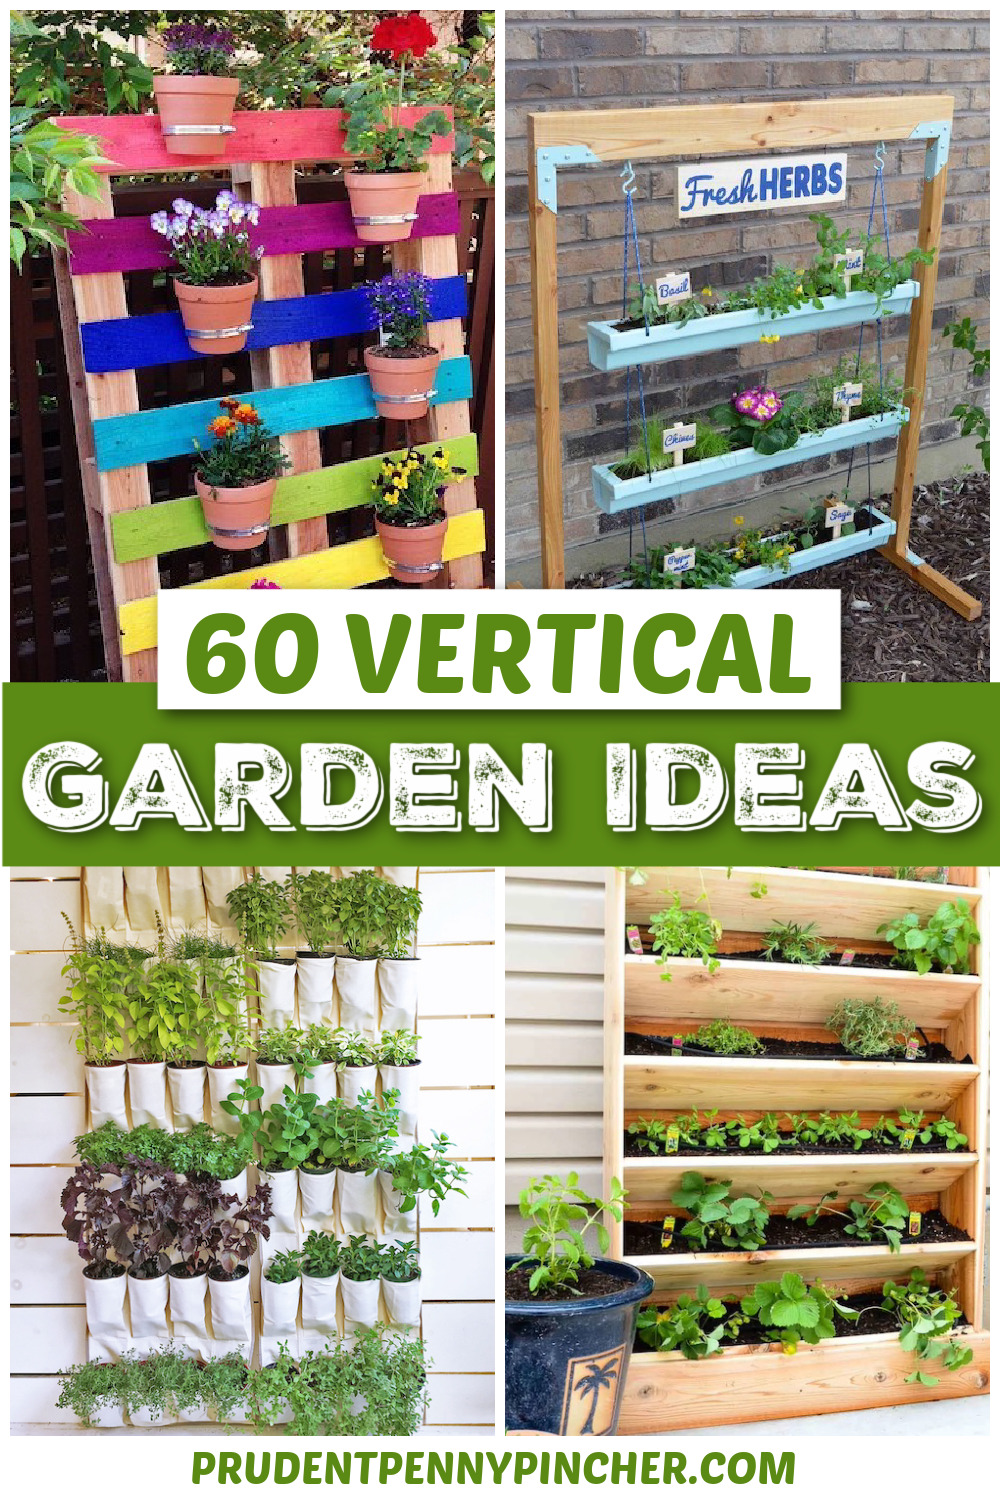 15 DIY Vertical Garden Ideas for Small Spaces - Prudent Penny Pincher